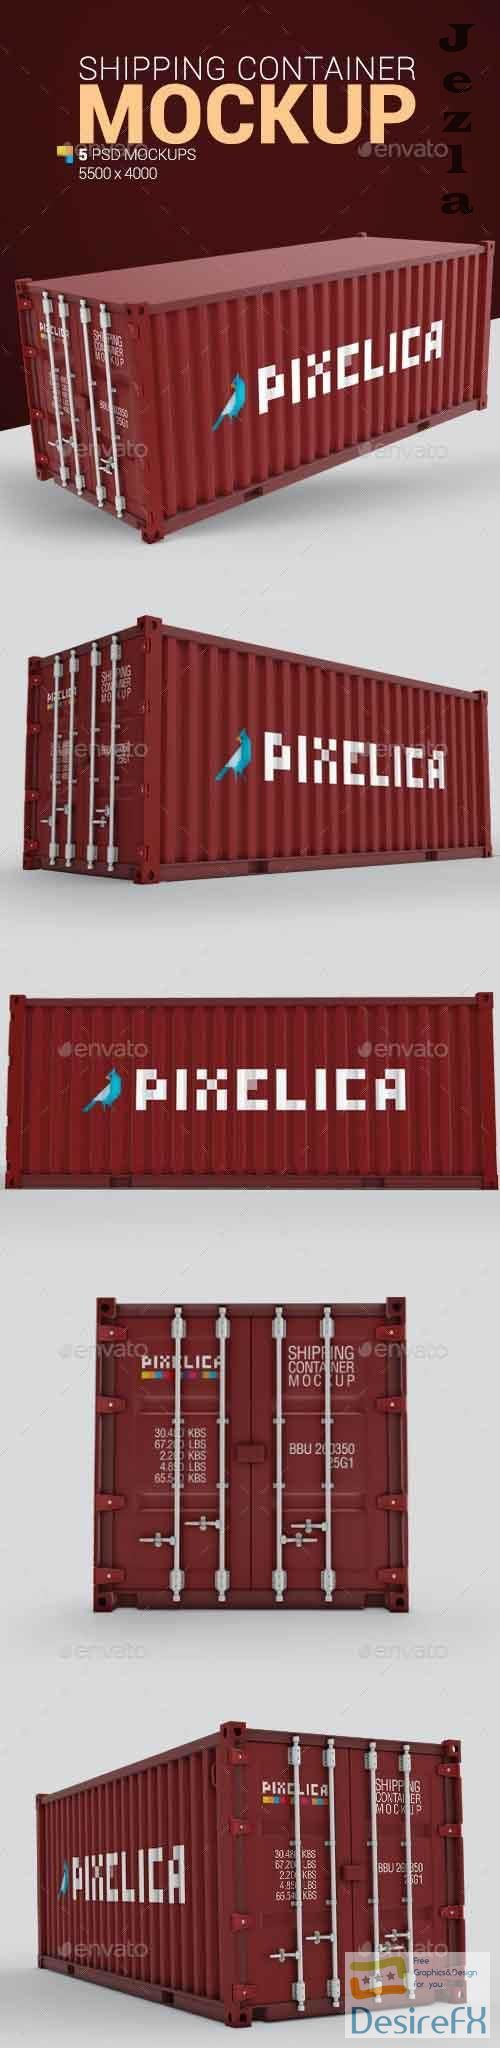 Shipping Container Mockup - 22332187